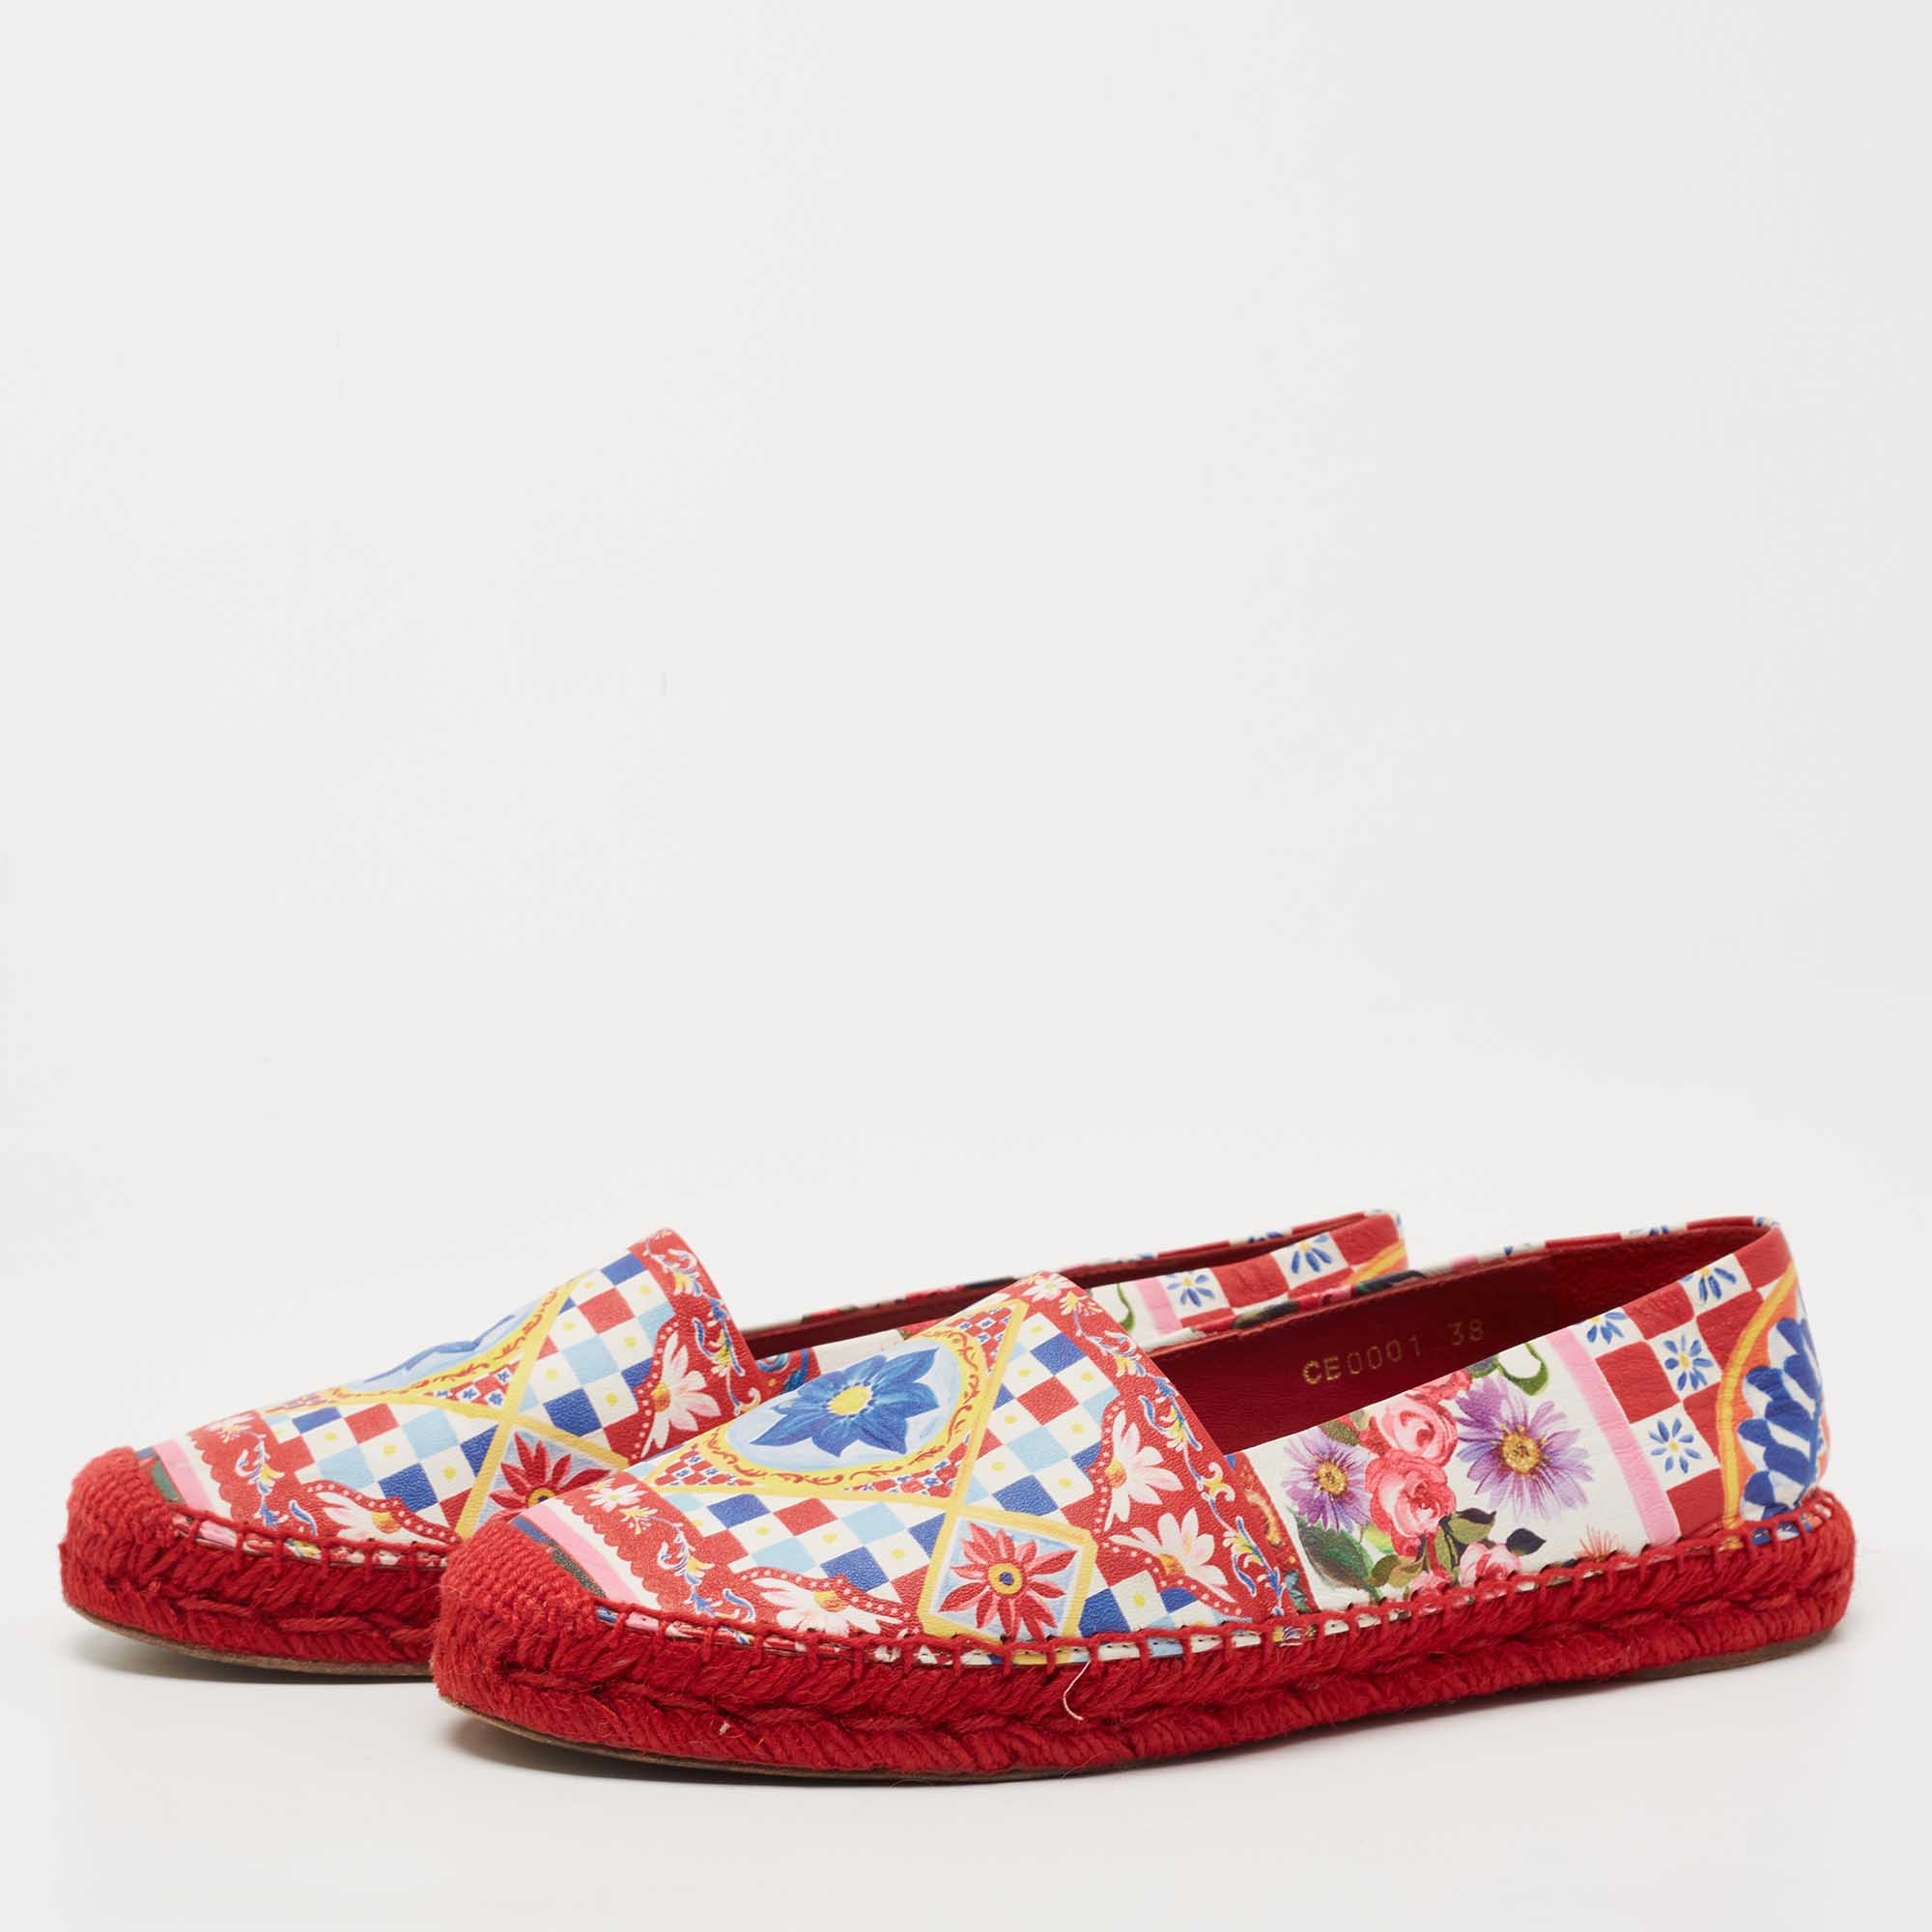 

Dolce & Gabbana Multicolor Printed Leather Espadrille Flats Size